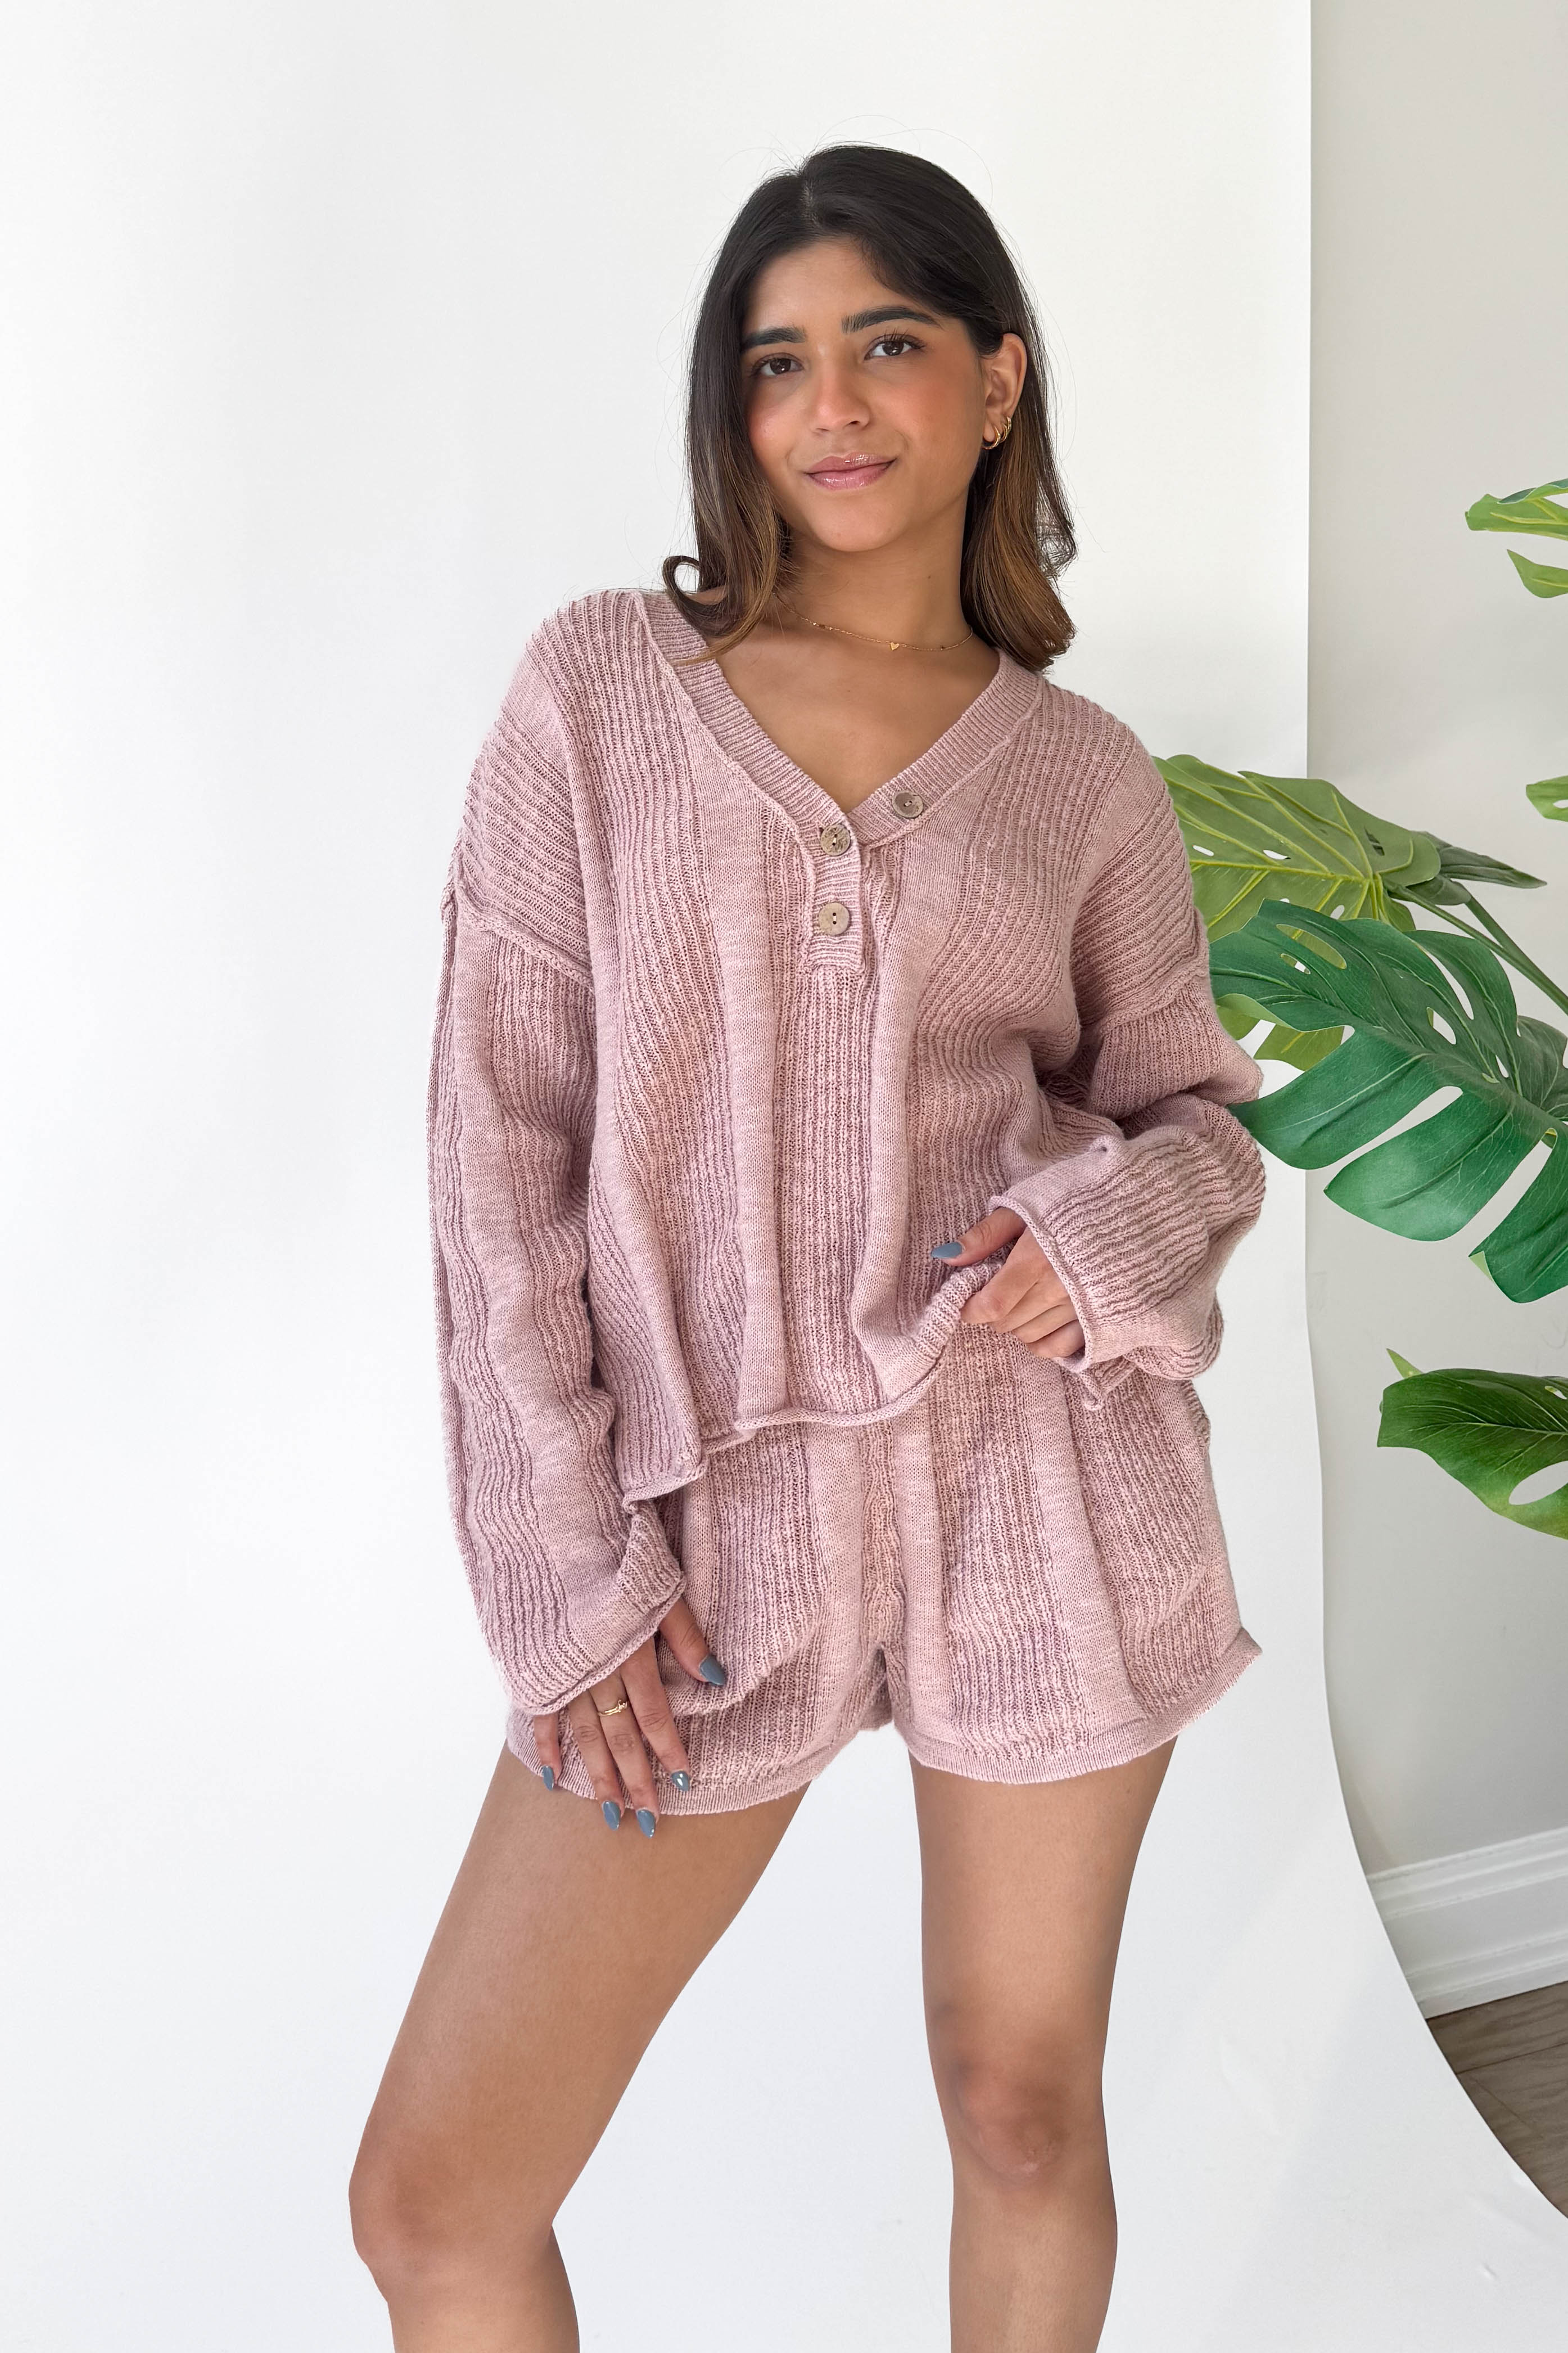 Just Like You Top in Dusty Rose